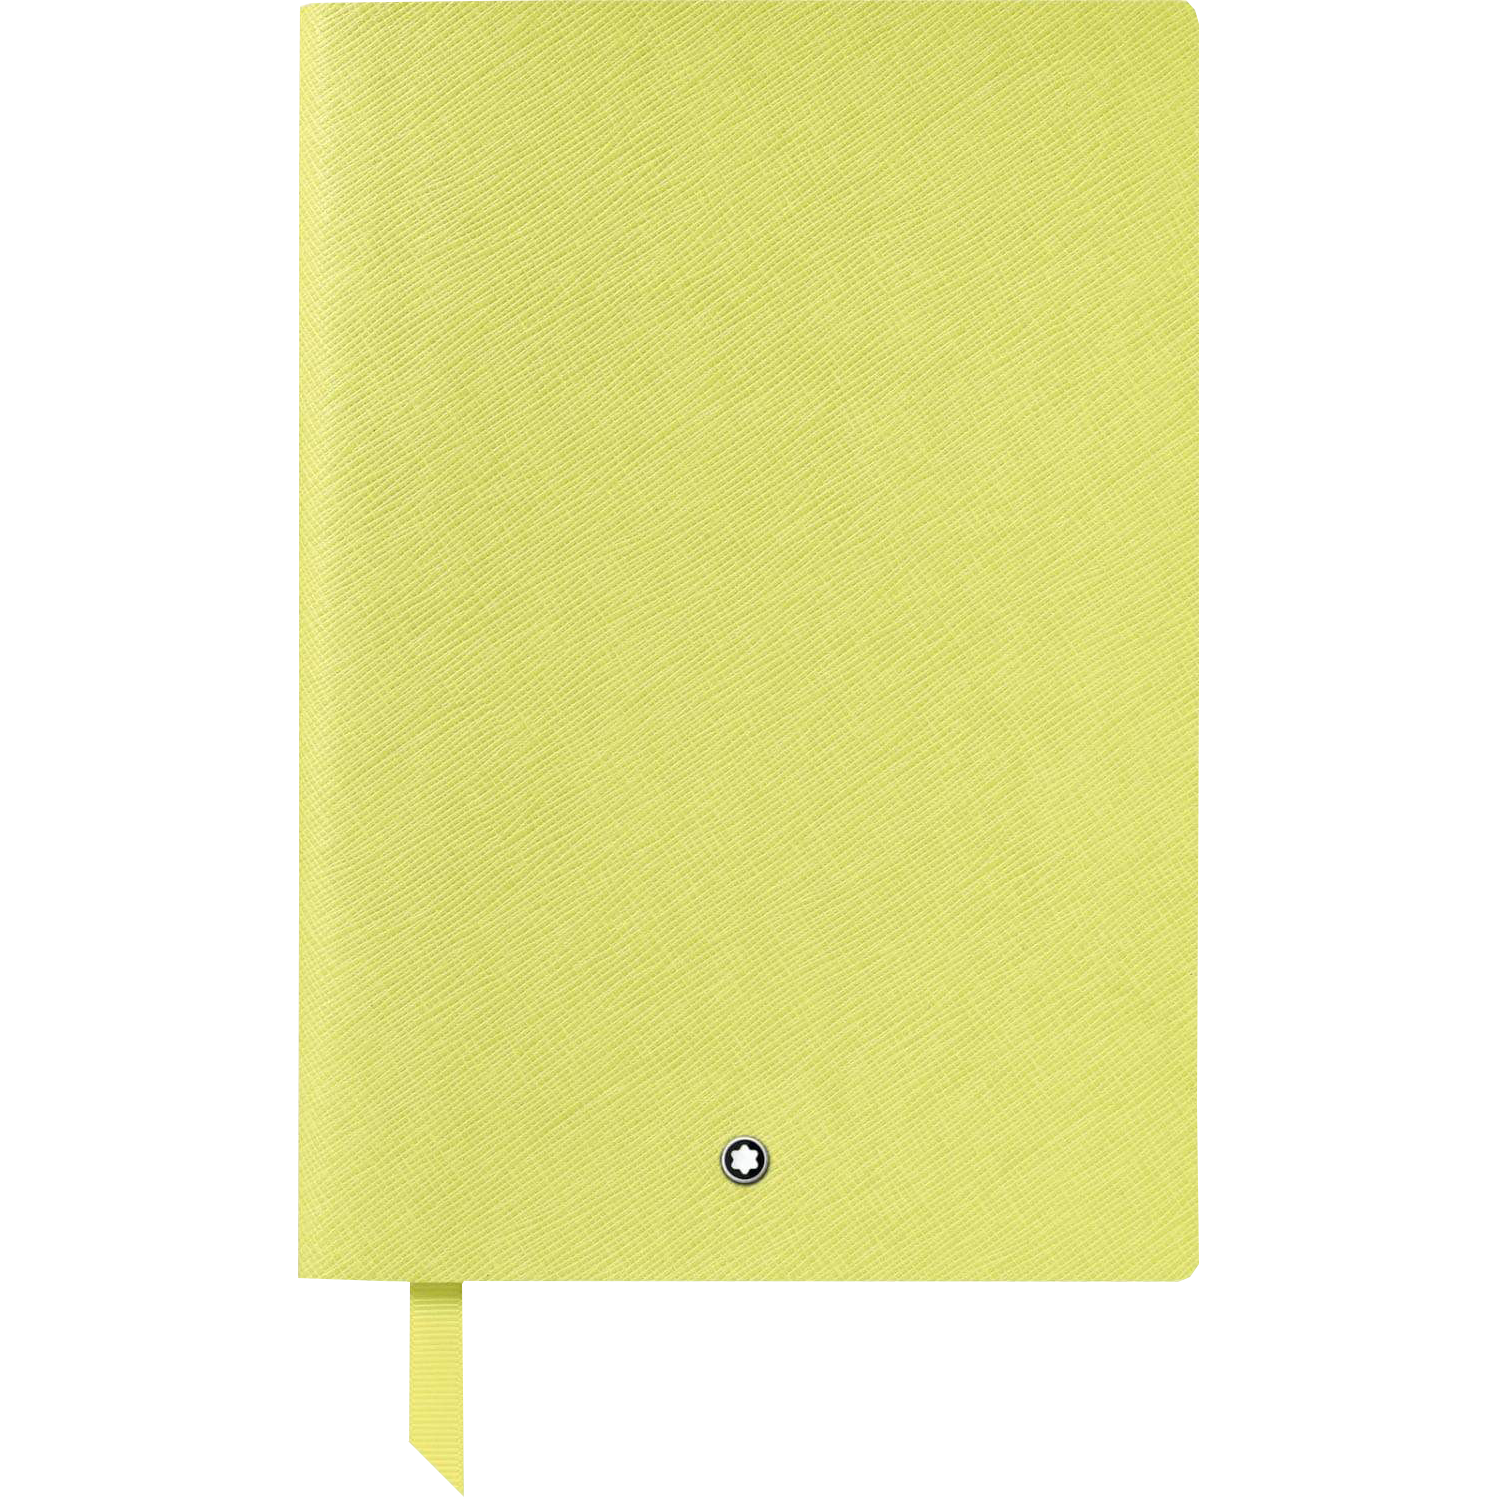 Montblanc Notebook - #146 Canary Yellow - Lined-Pen Boutique Ltd